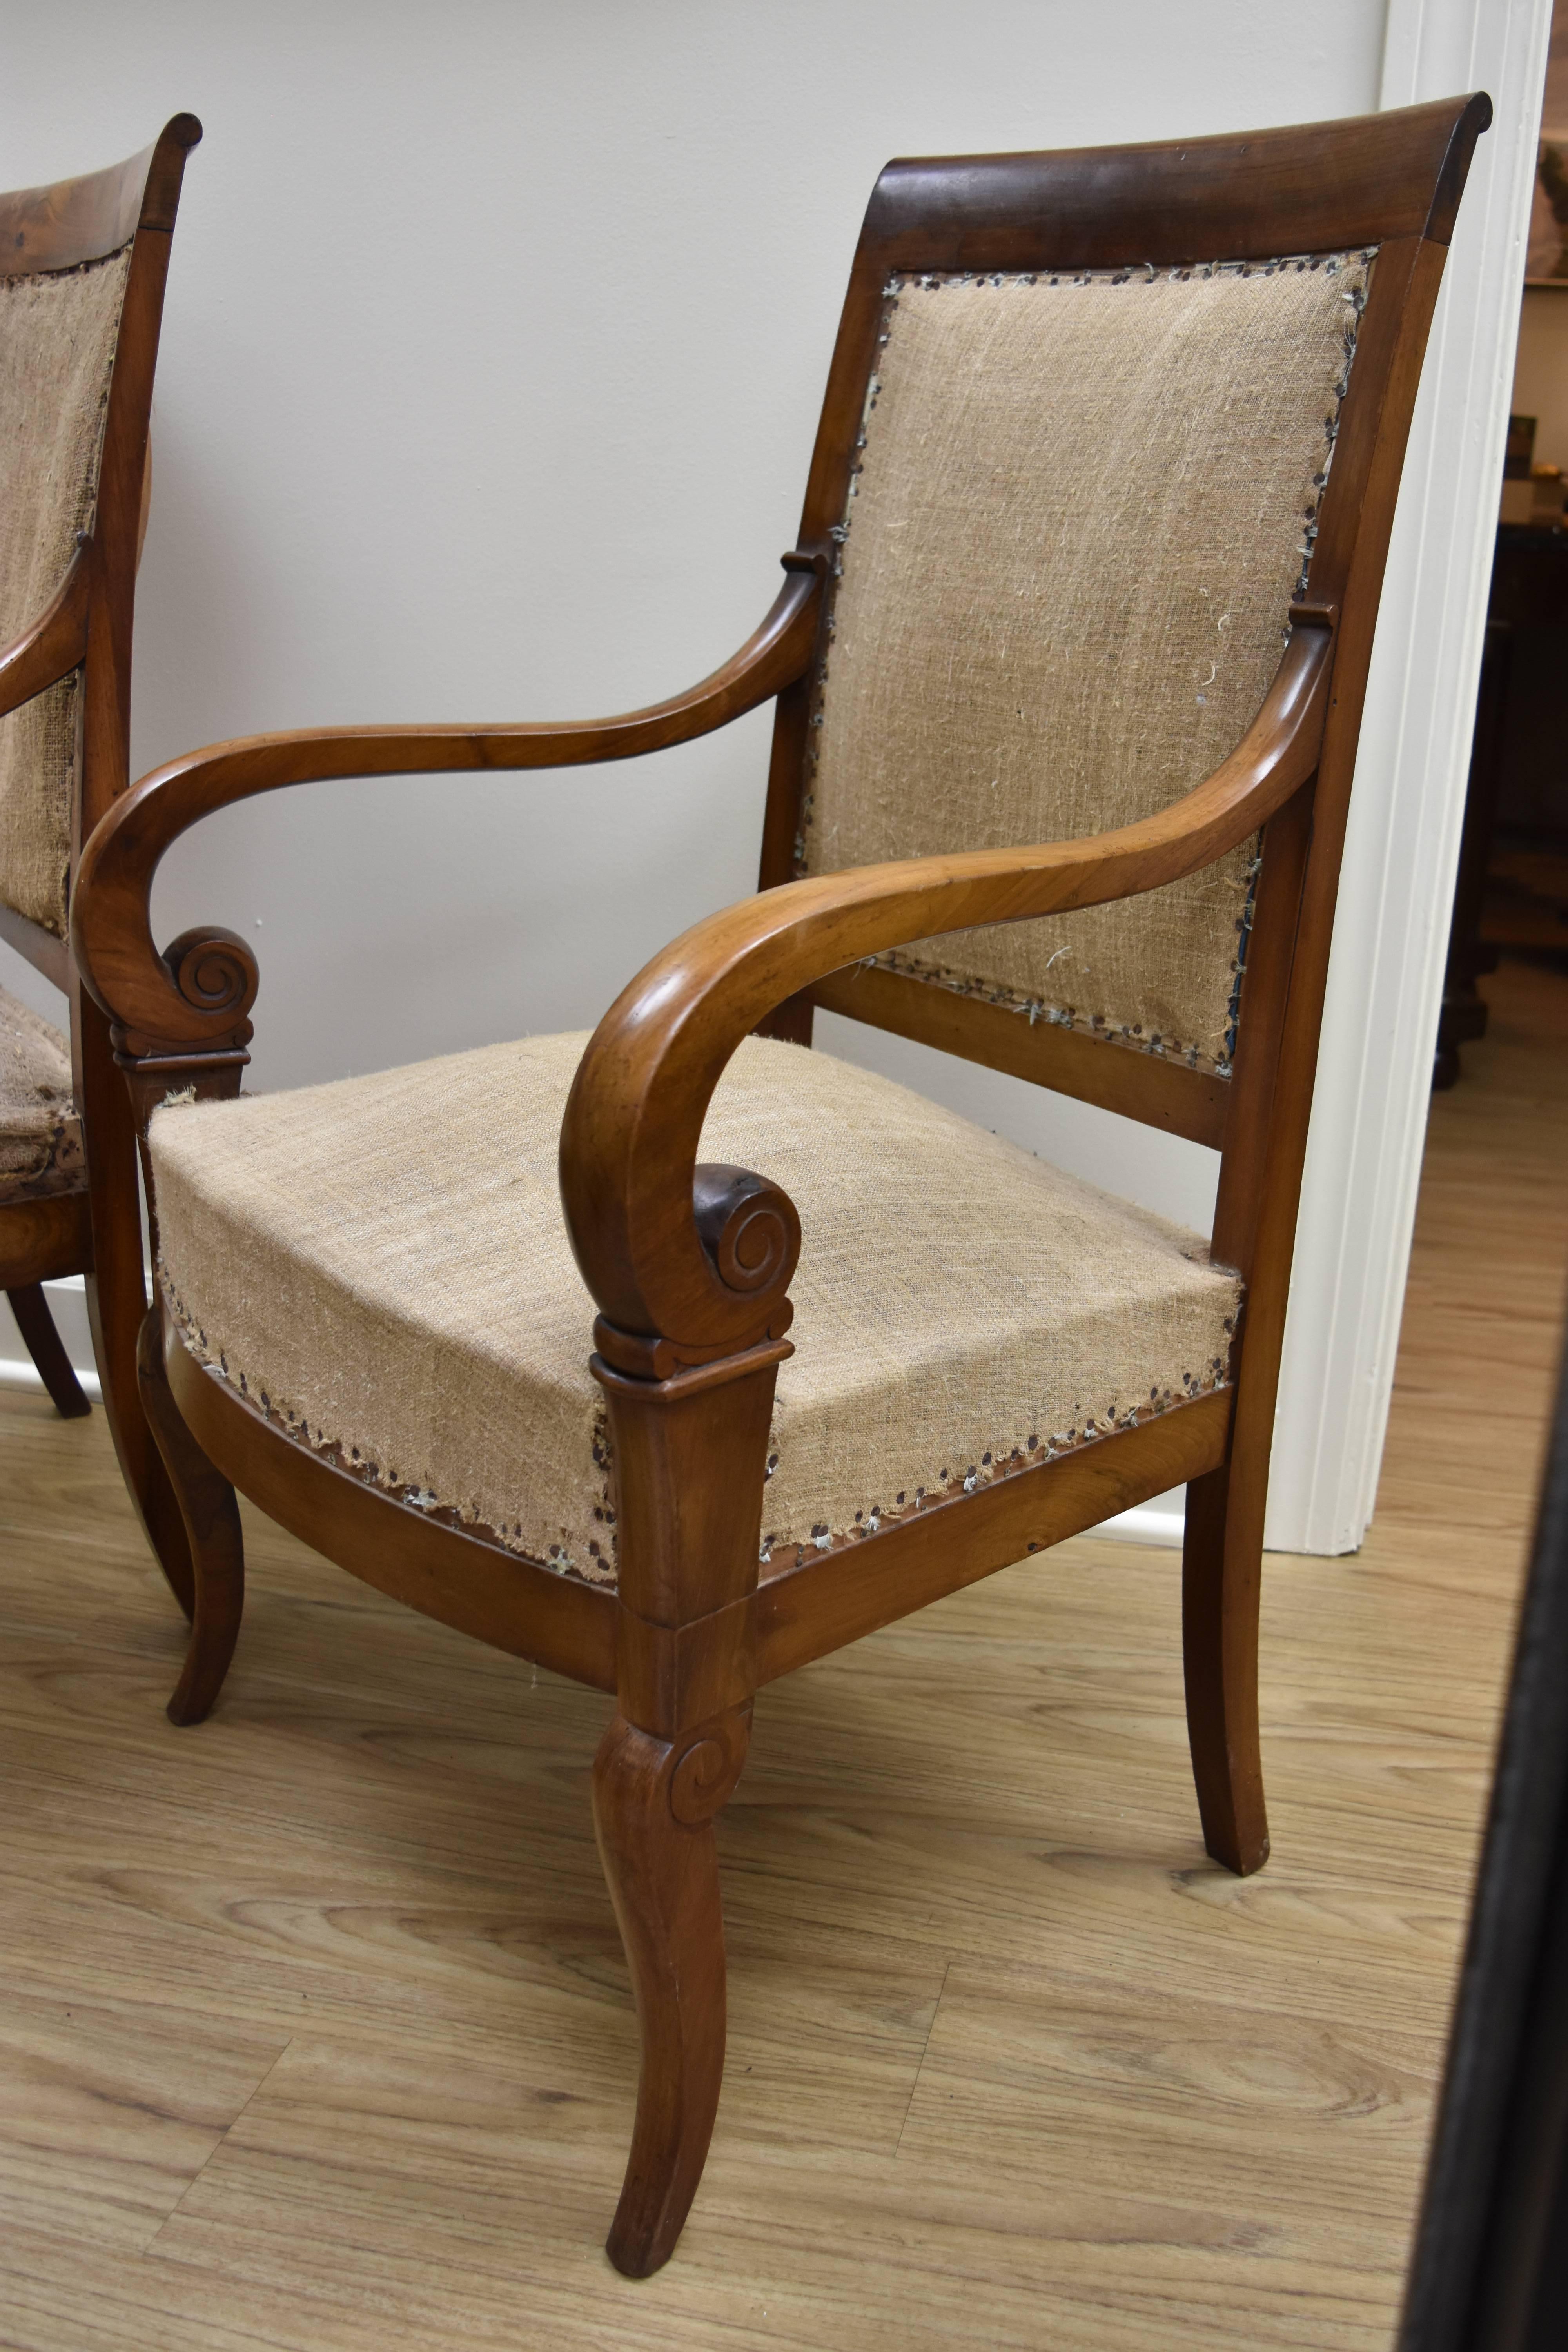 This pair of Empire style walnut armchairs has a lovely warm walnut finish and features scrolling arms. The chairs need to be reupholstered but are shown with the original old nails and burlap fabric.